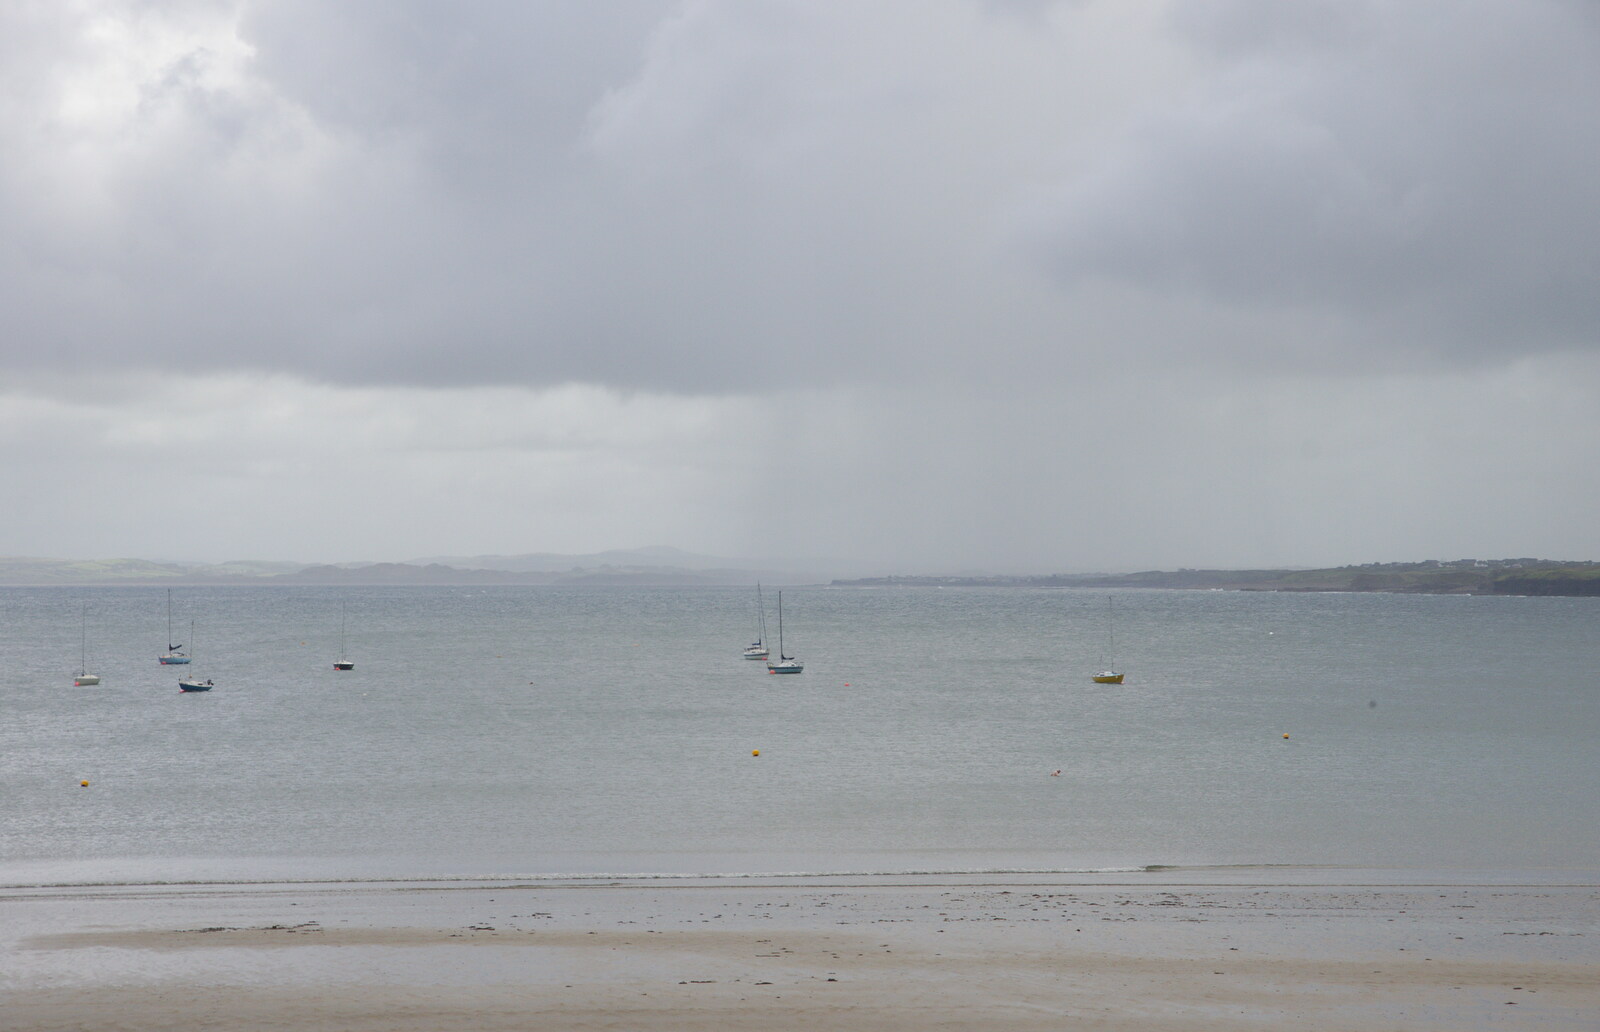 Boats on the sea, with a wall of rain from Mullaghmore Beach and Marble Arch Caves, Sligo and Fermanagh, Ireland - 19th August 2019